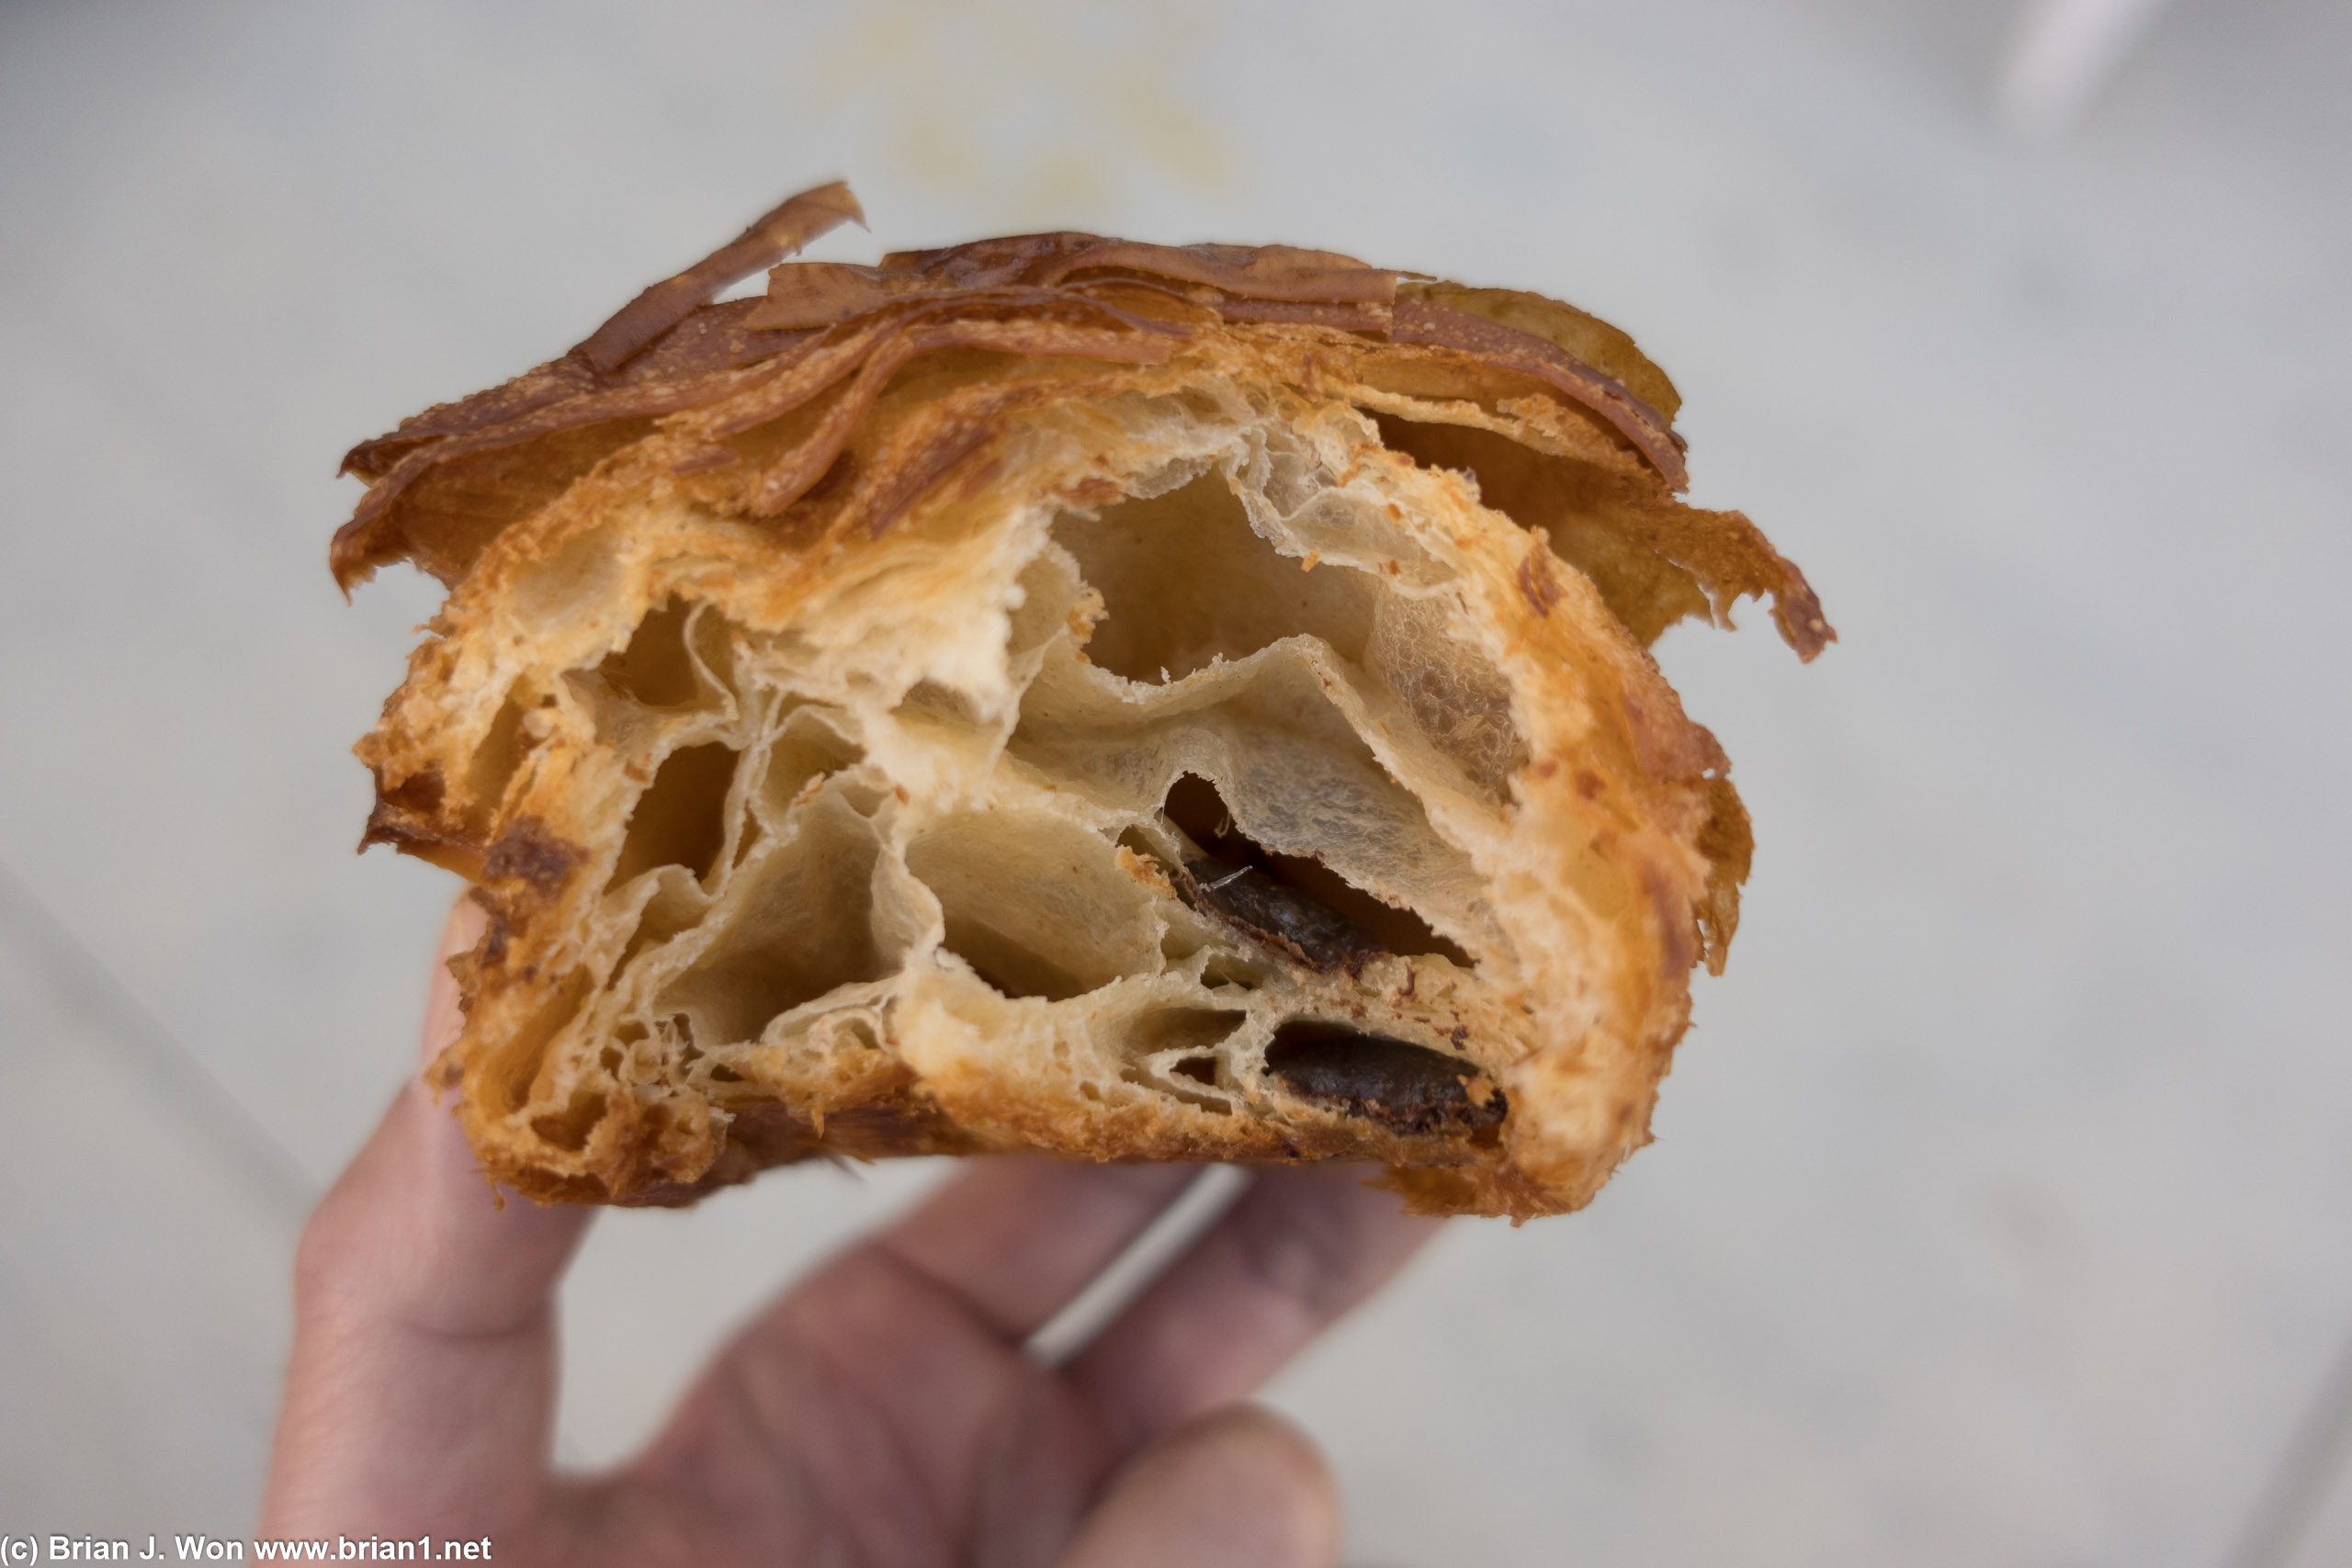 The chocolate placement in the pain au chocolat is decidedly substandard.